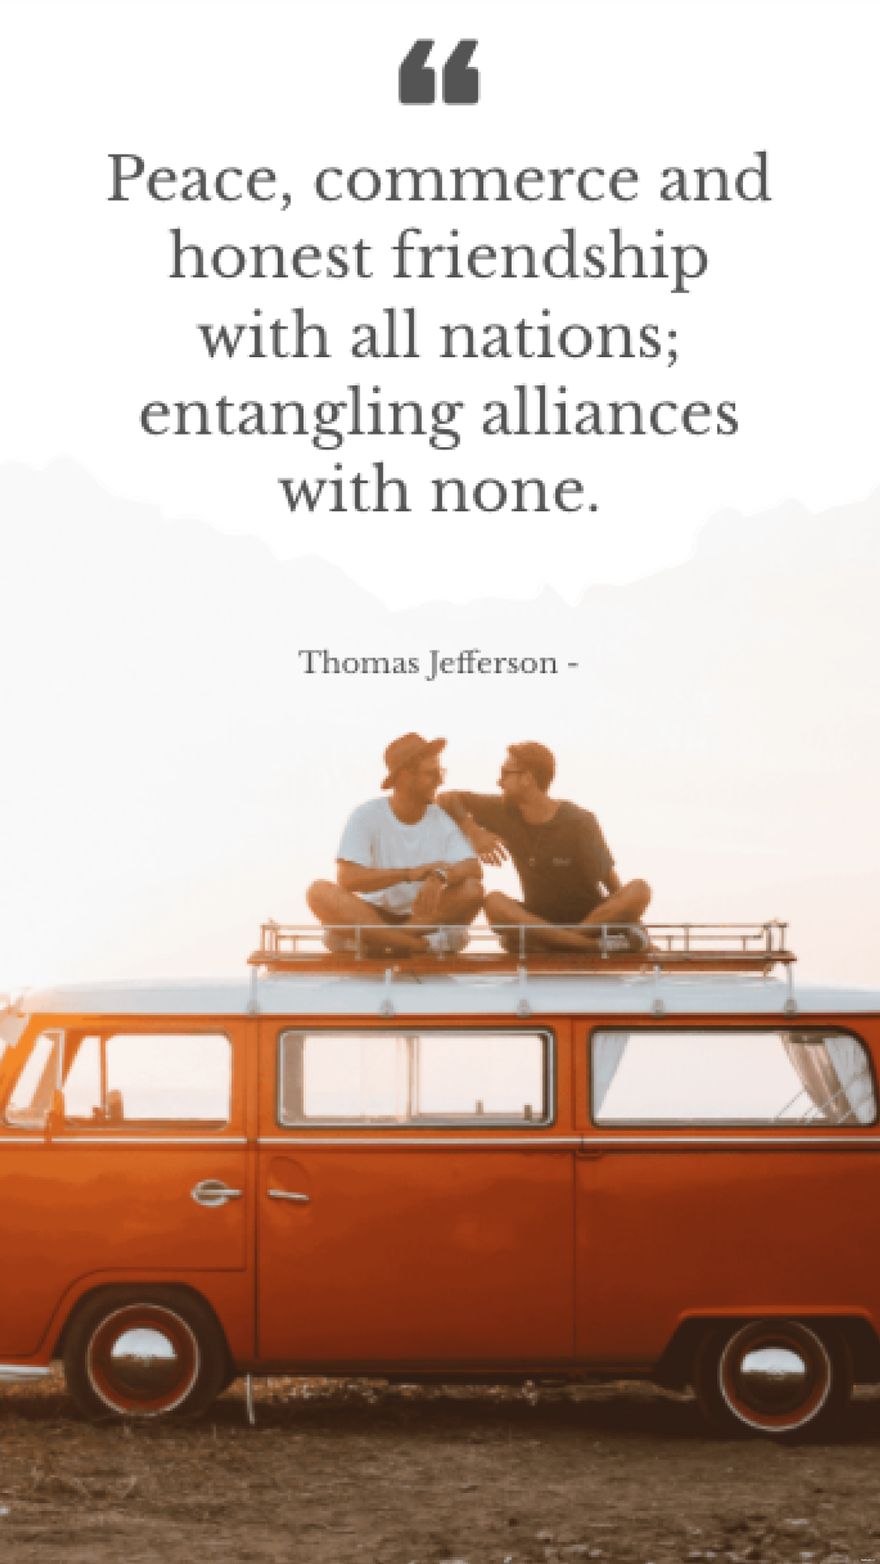 Thomas Jefferson - Peace, commerce and honest friendship with all nations; entangling alliances with none.